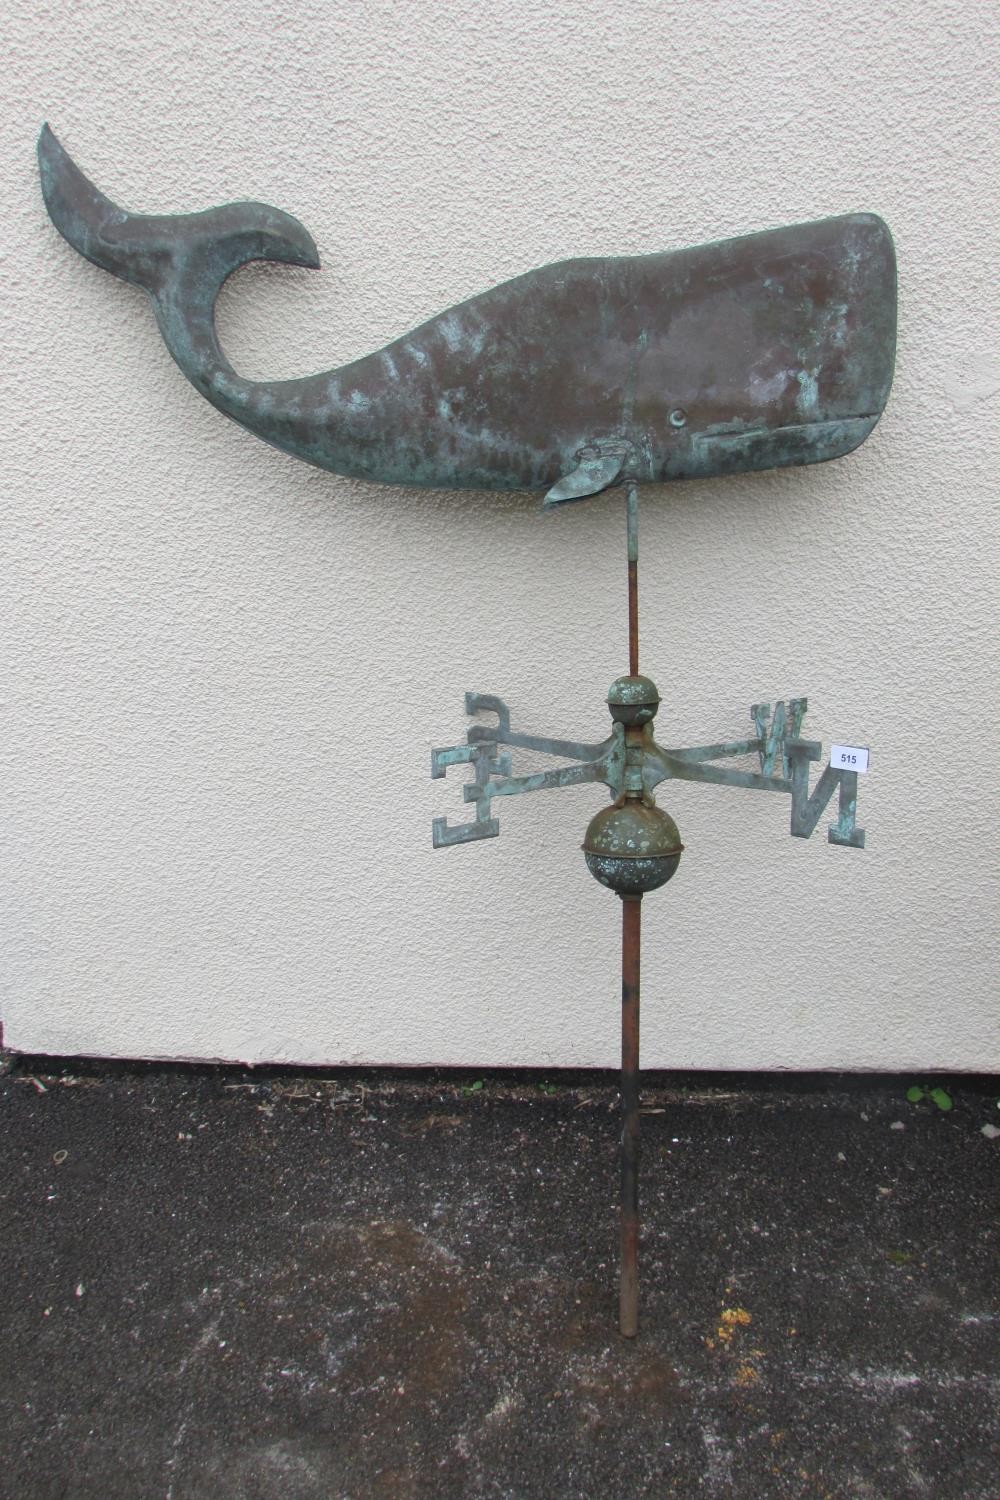 An unusual decorative weathervane in the form of a stylised blue wale, above spinning directional